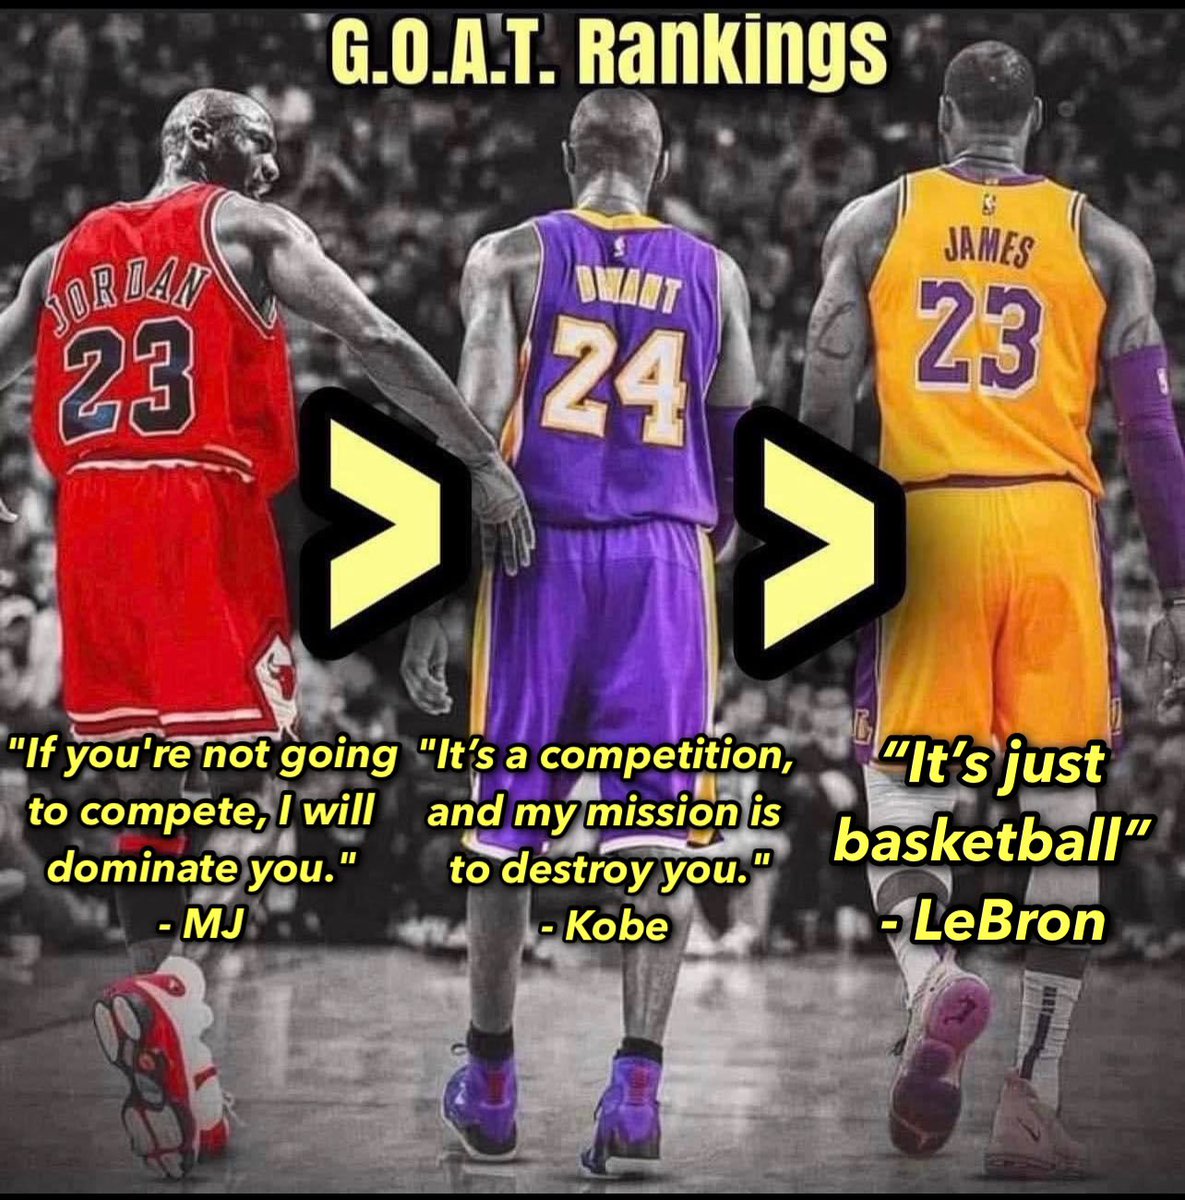 LeBron has no competitive fire. That’s why he kept switching super teams to win his titles.

#Bulls Michael Jordan & #Lakers Kobe Bryant were true competitors.